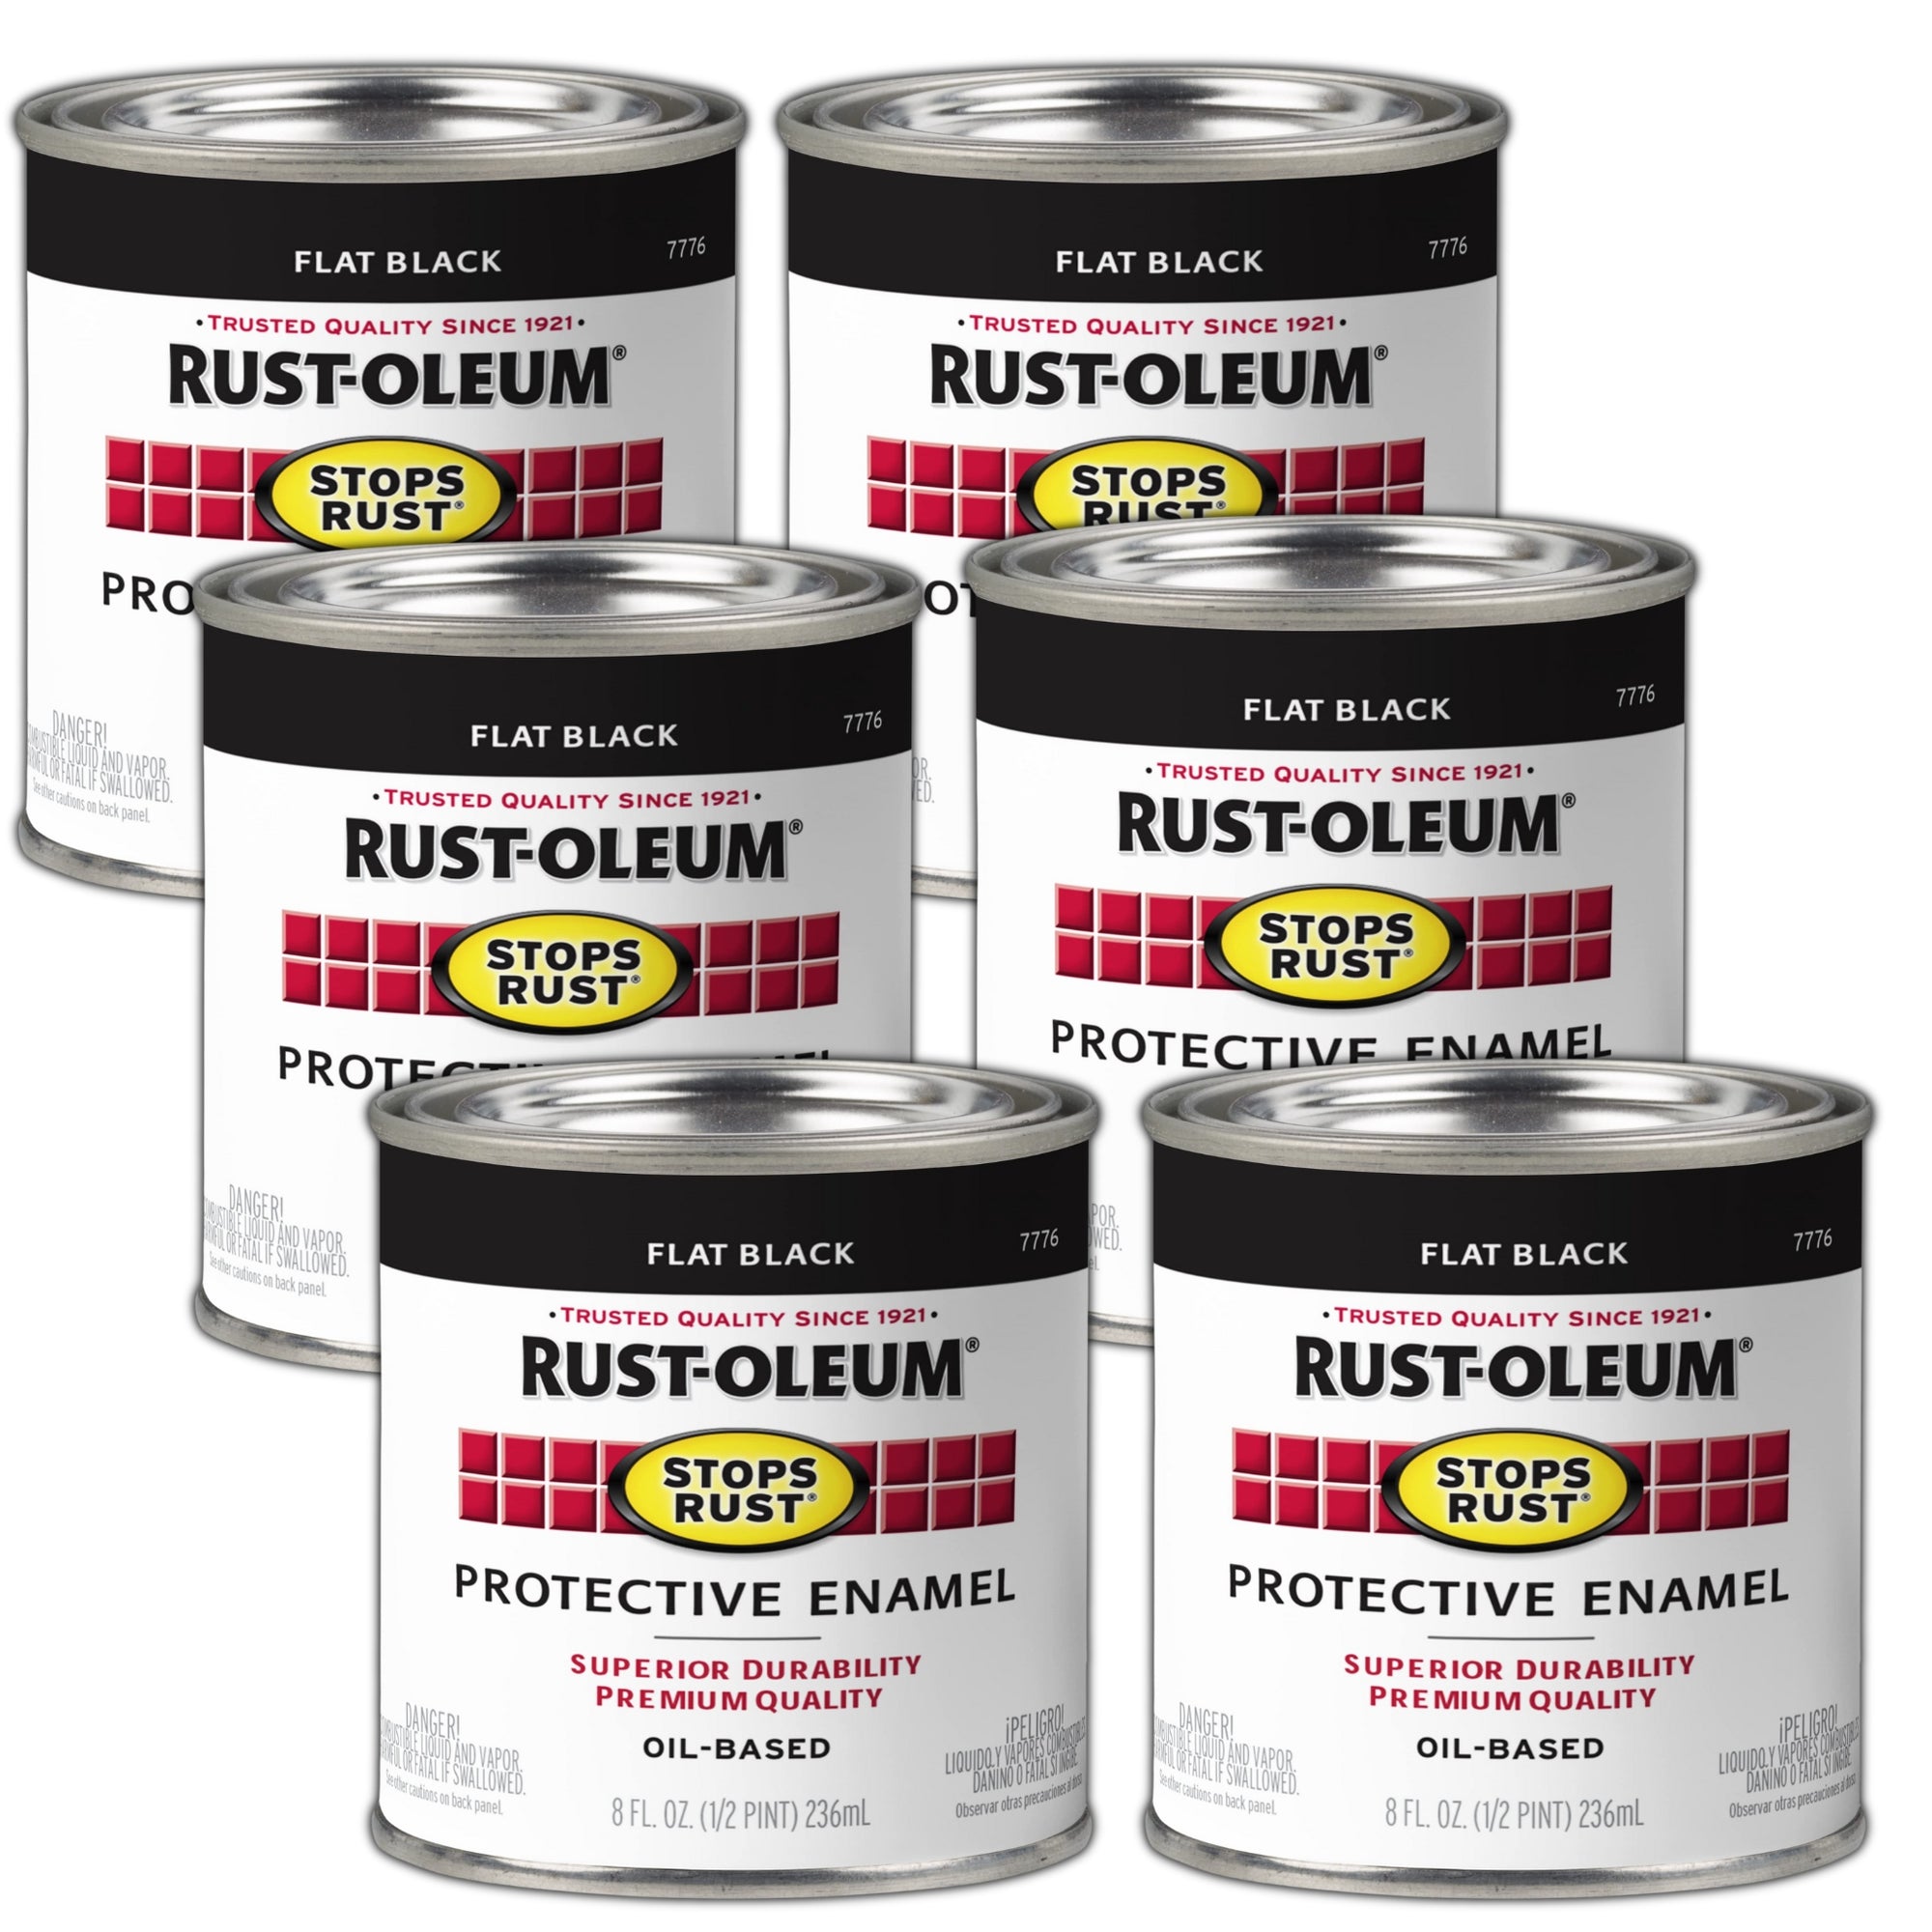 Rust-Oleum 7776730 Stops Rust Protective Enamel 236ml | FLAT BLACK (6 Cans) - South East Clearance Centre